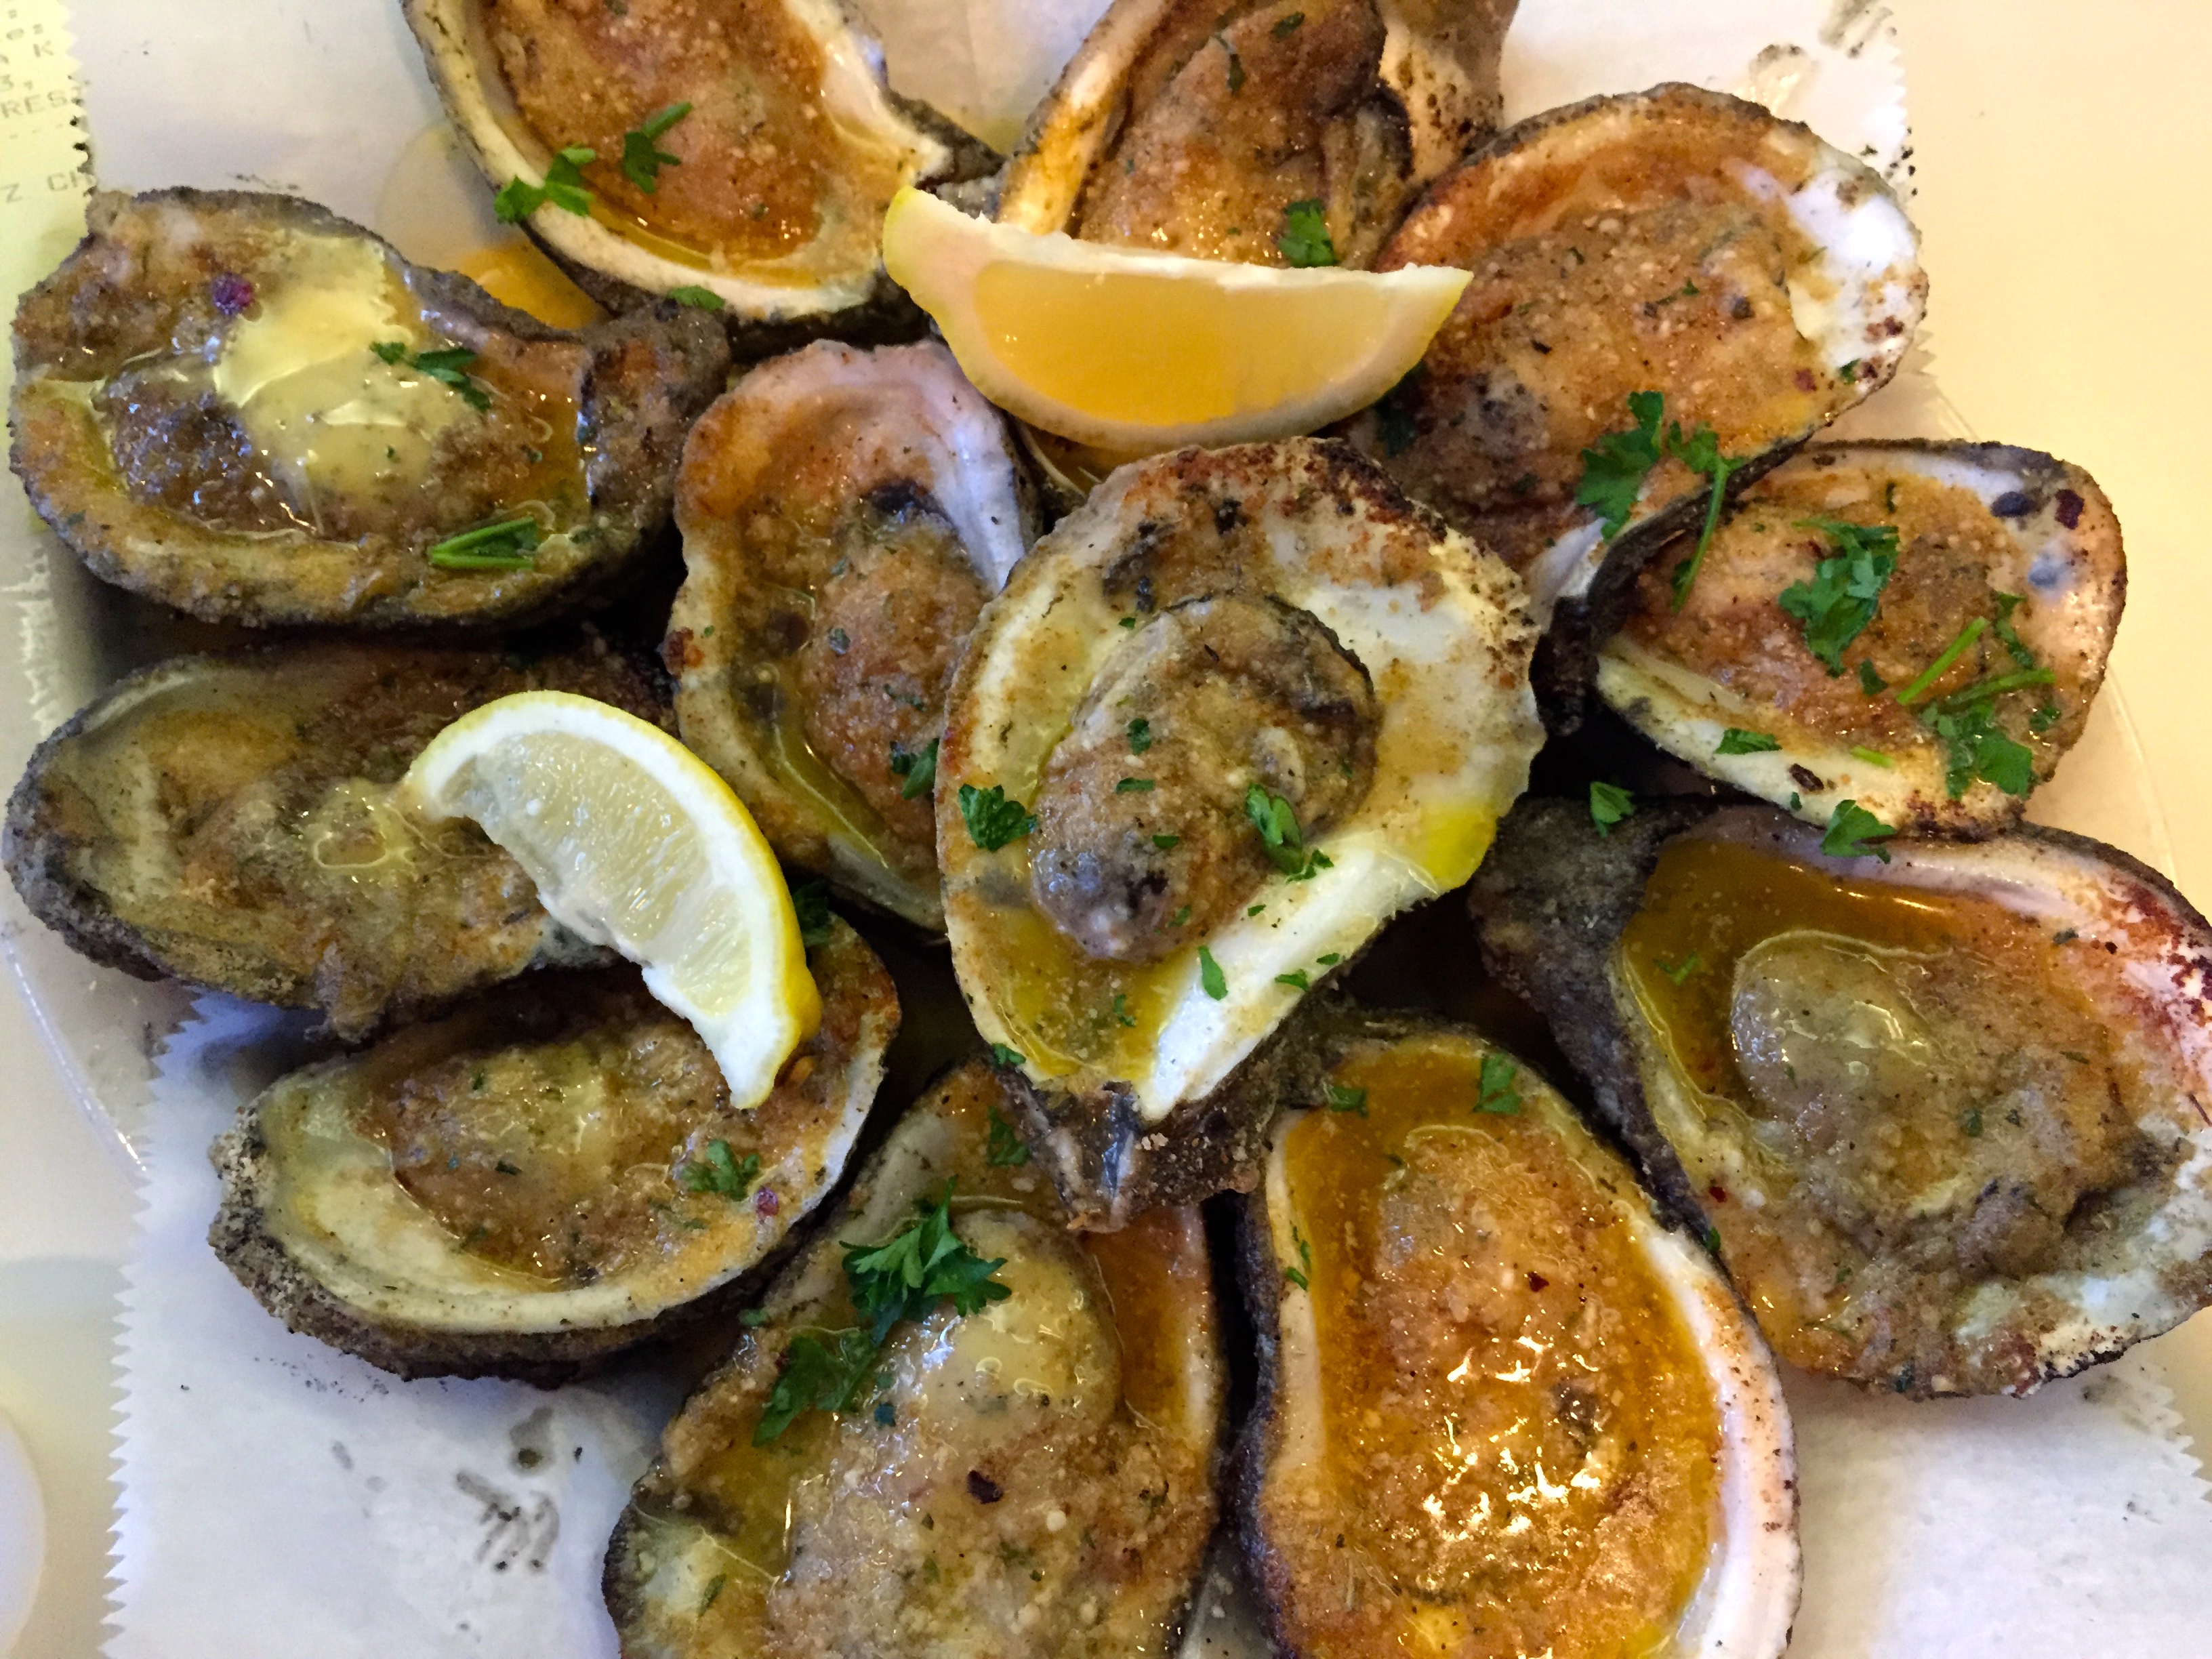 Charbroiled oysters! So buttery.